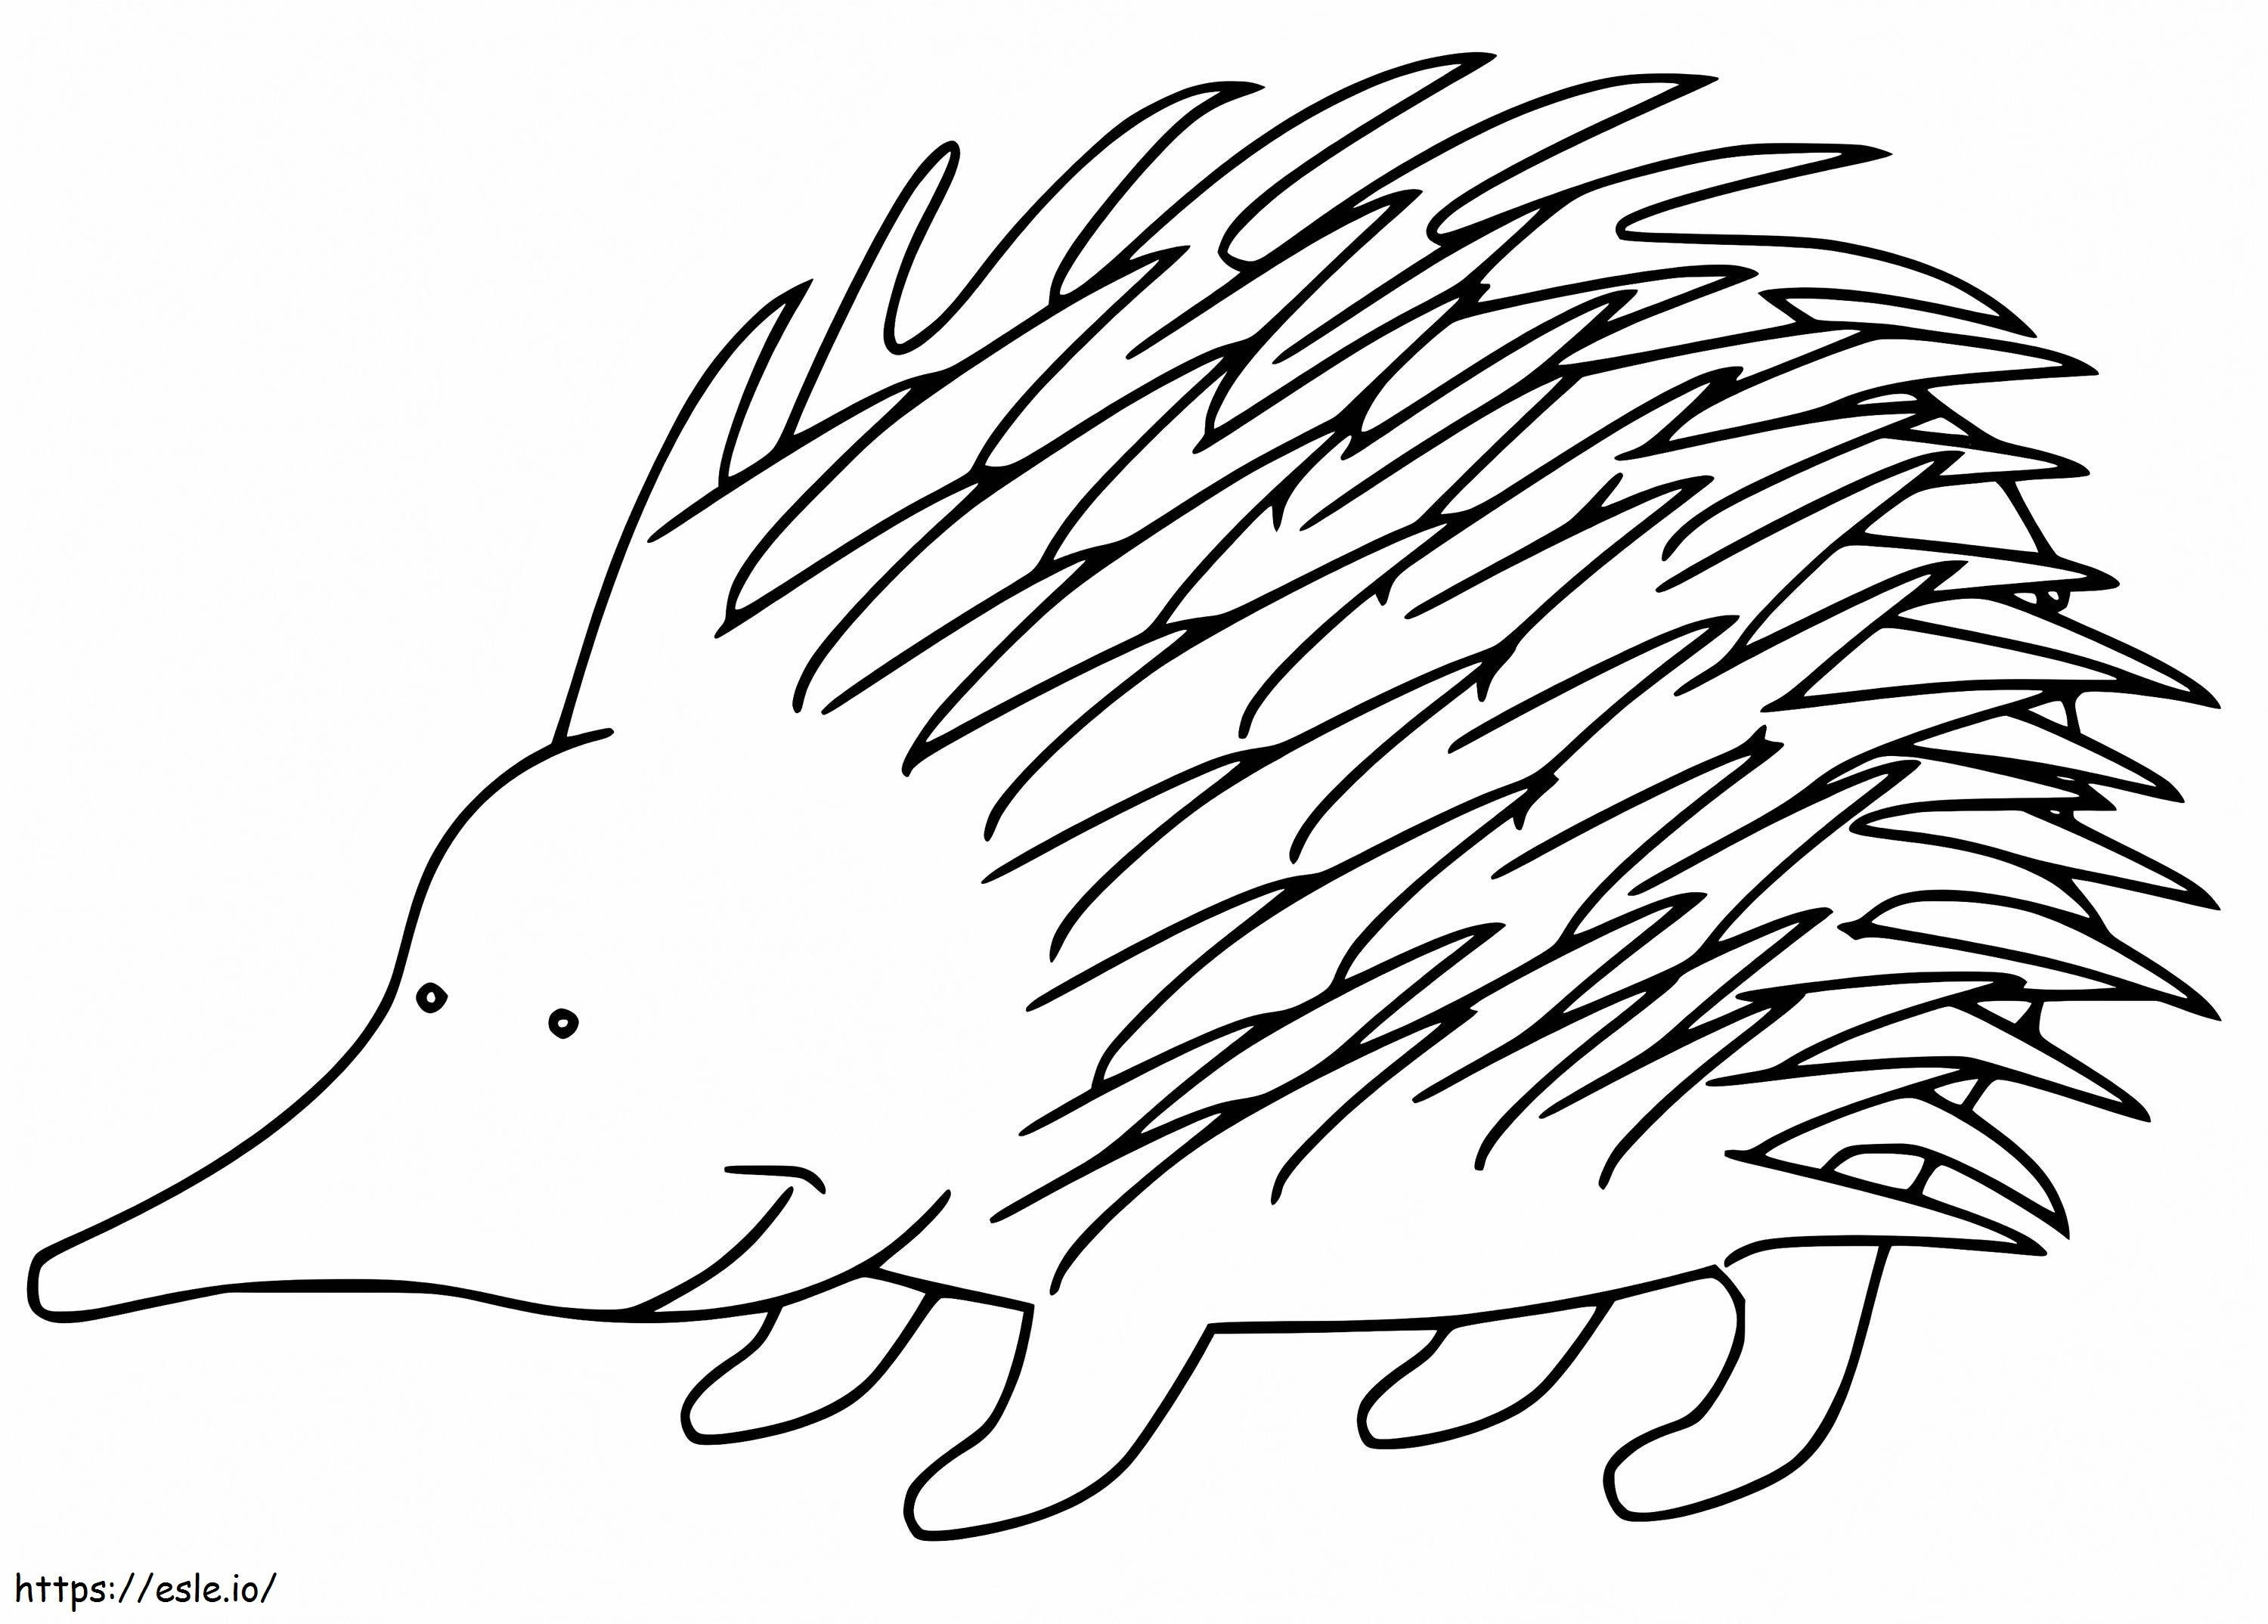 Happy Echidna coloring page